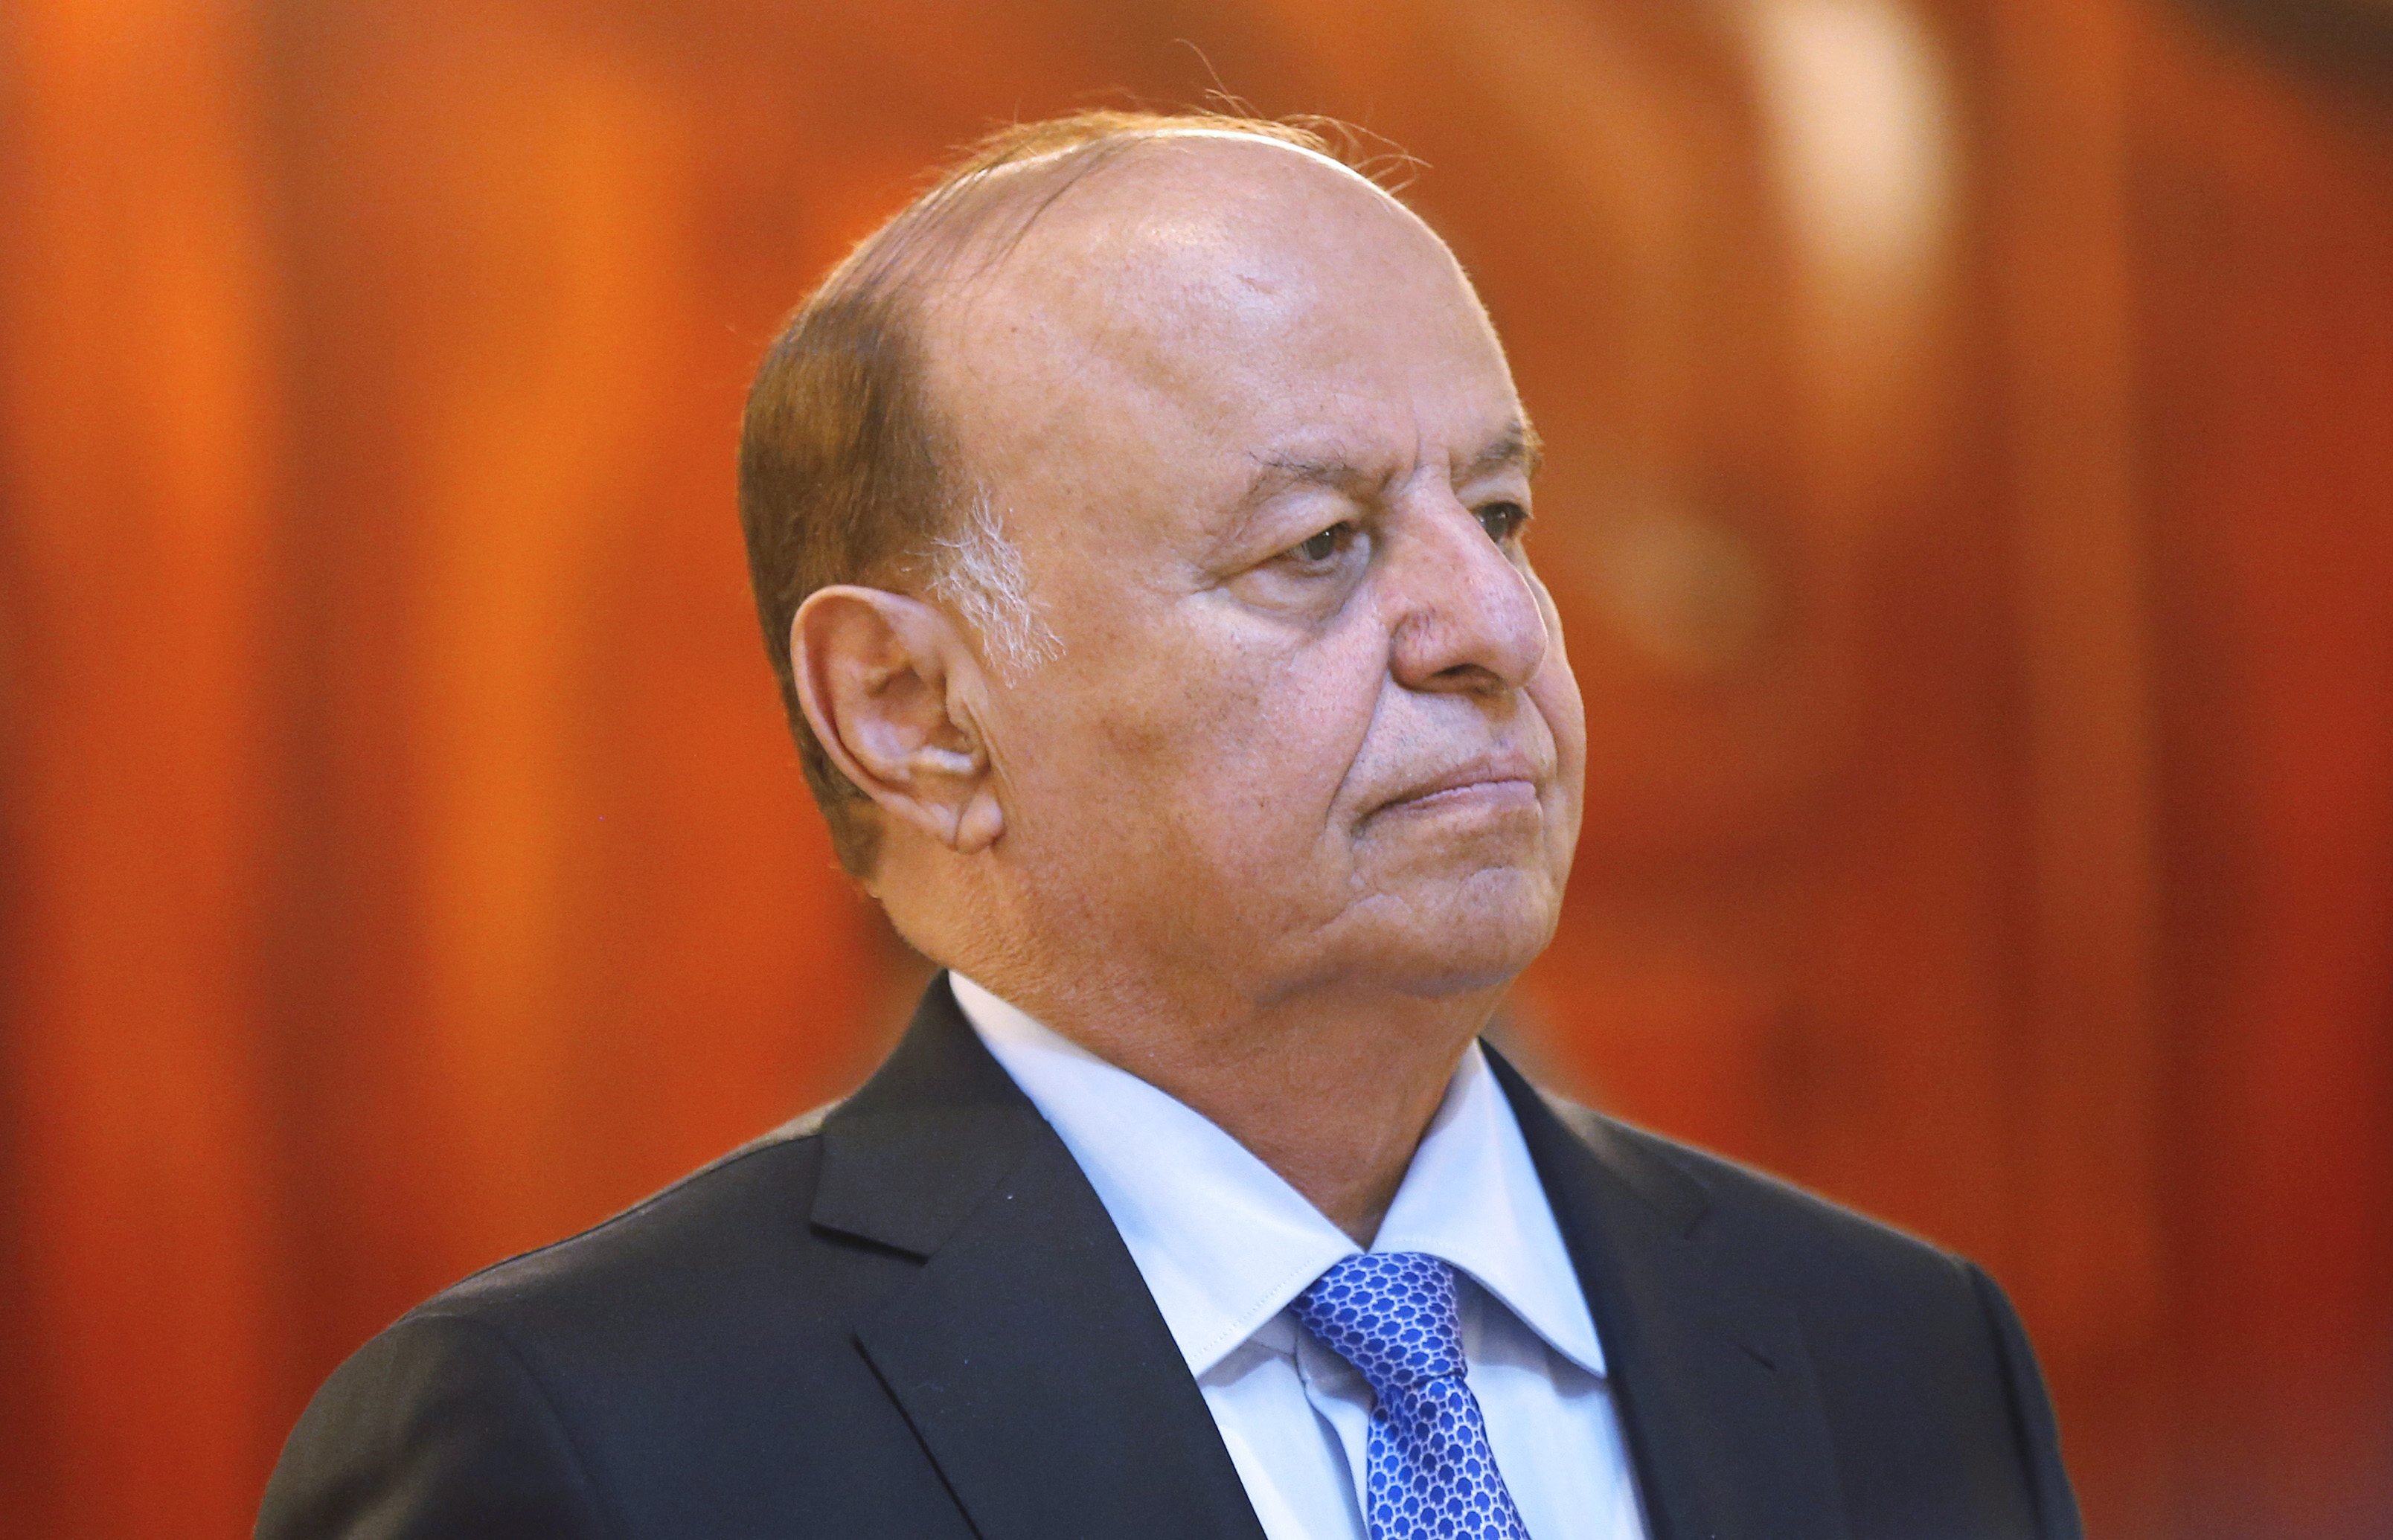 Yemen's President Abdel Rabbo Mansour Hadi stands during a reception ceremony during the holy fasting month of Ramadan at the Republican Palace in the Yemeni capital, Sana‘a, on July 7, 2014 (Khaled Abdullah—Reuters)